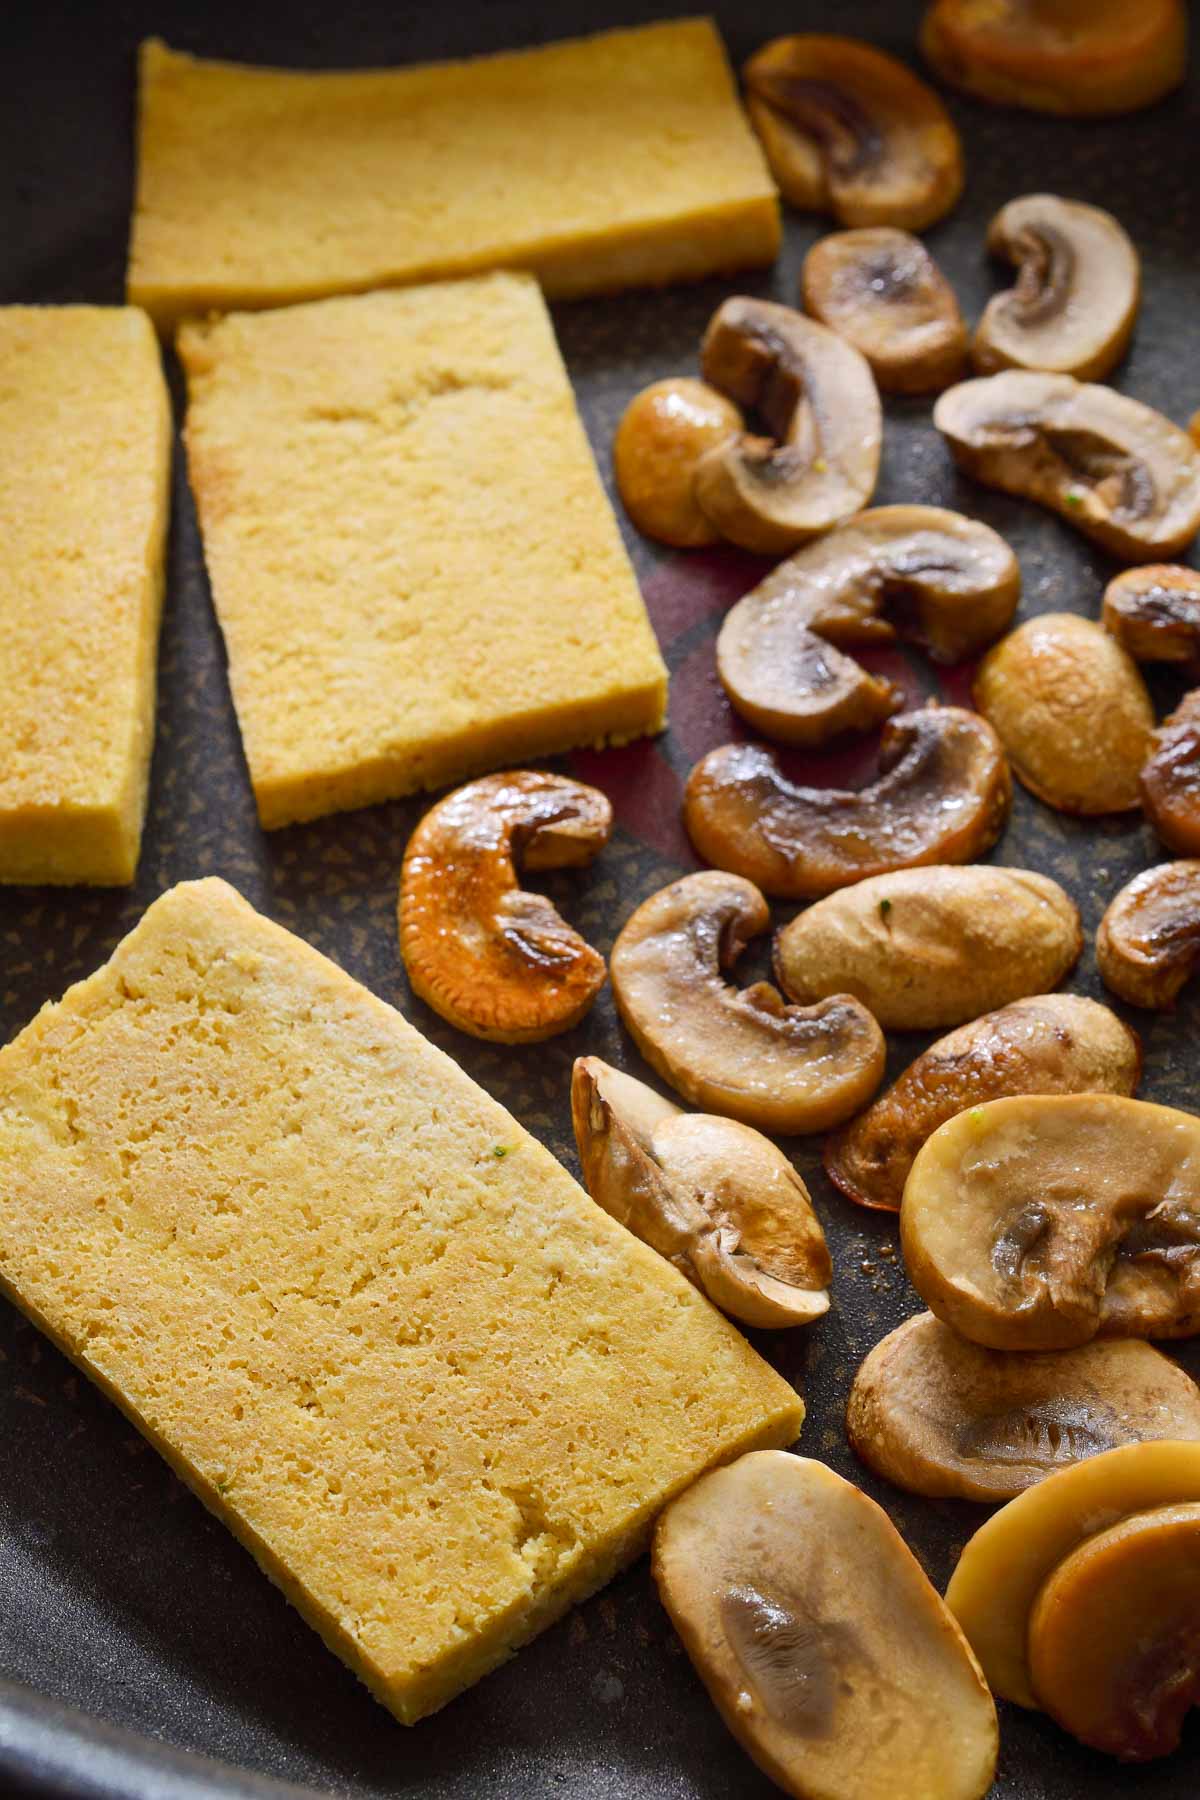 A pan with fried tofu slices and mushrooms.